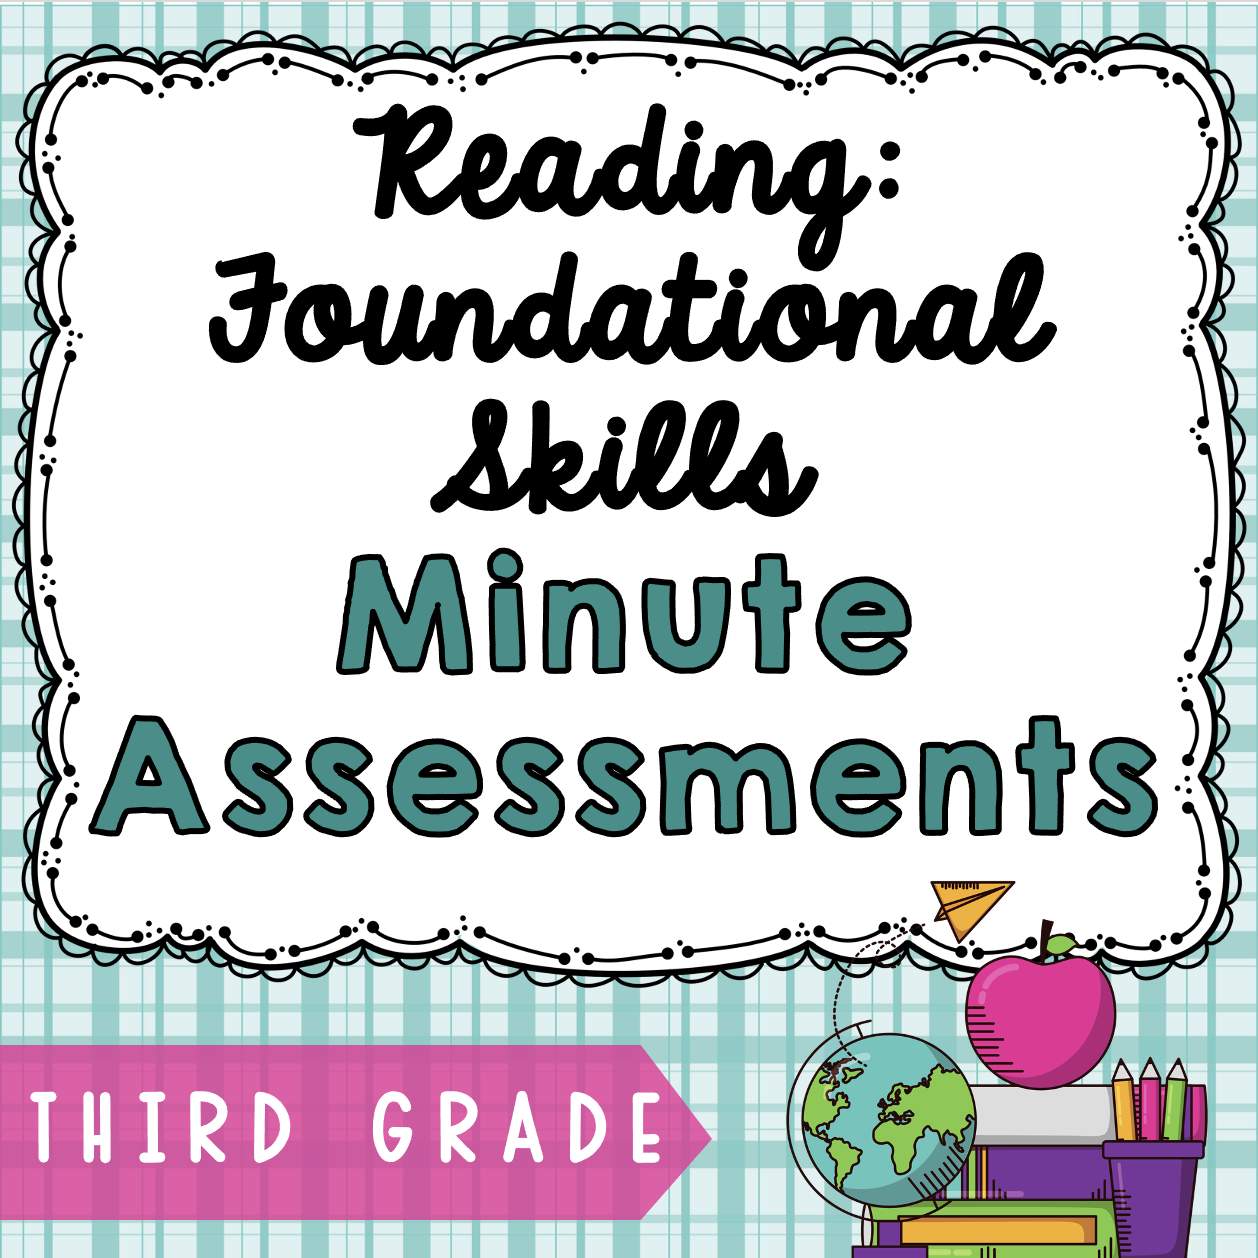 Reading Foundational Skills Minute Assessments